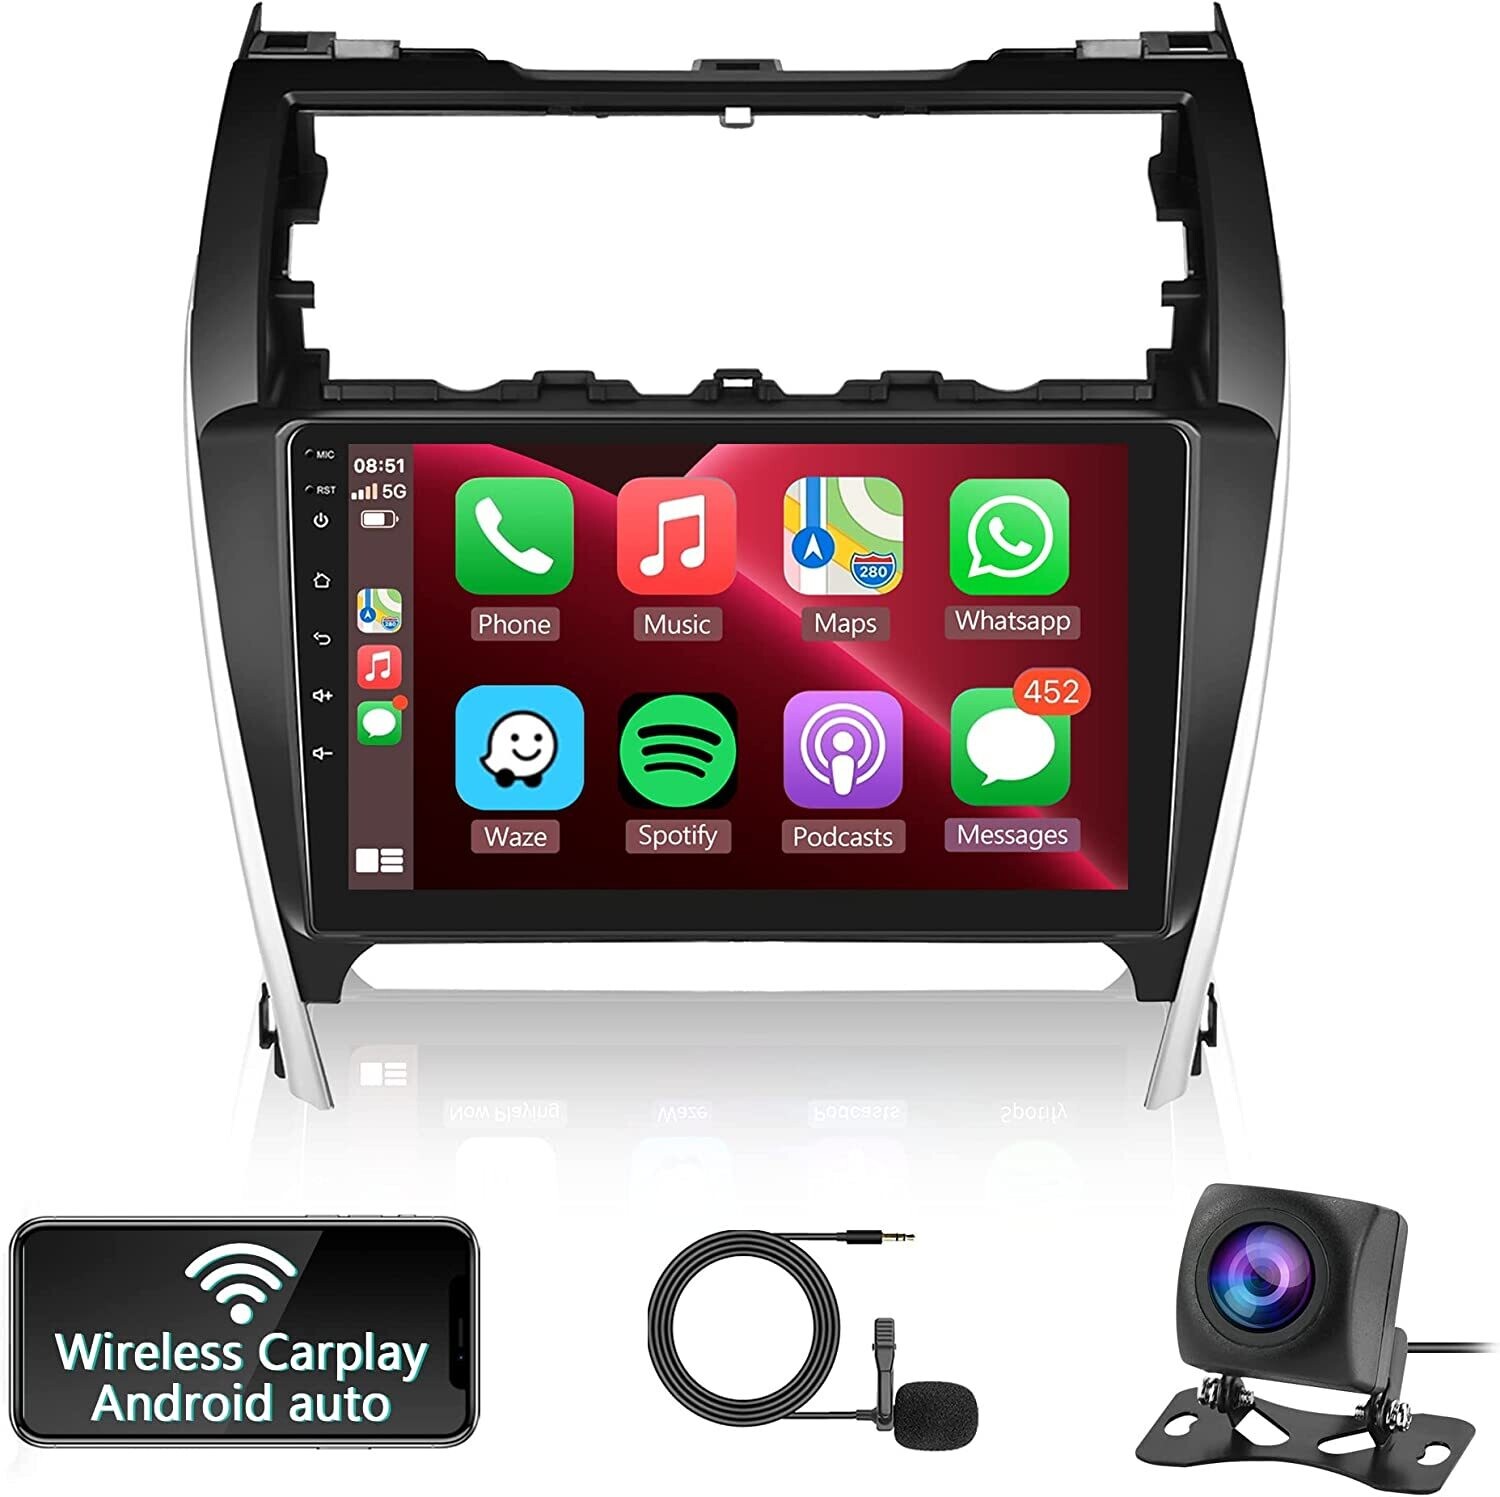 Toyota American Camry Android touch screen smart custom car stereo radio 10.1 inch, with bluetooth, GPS, Android auto and Apple Carplay 2gb 32gb. 2012, 2013, 2014